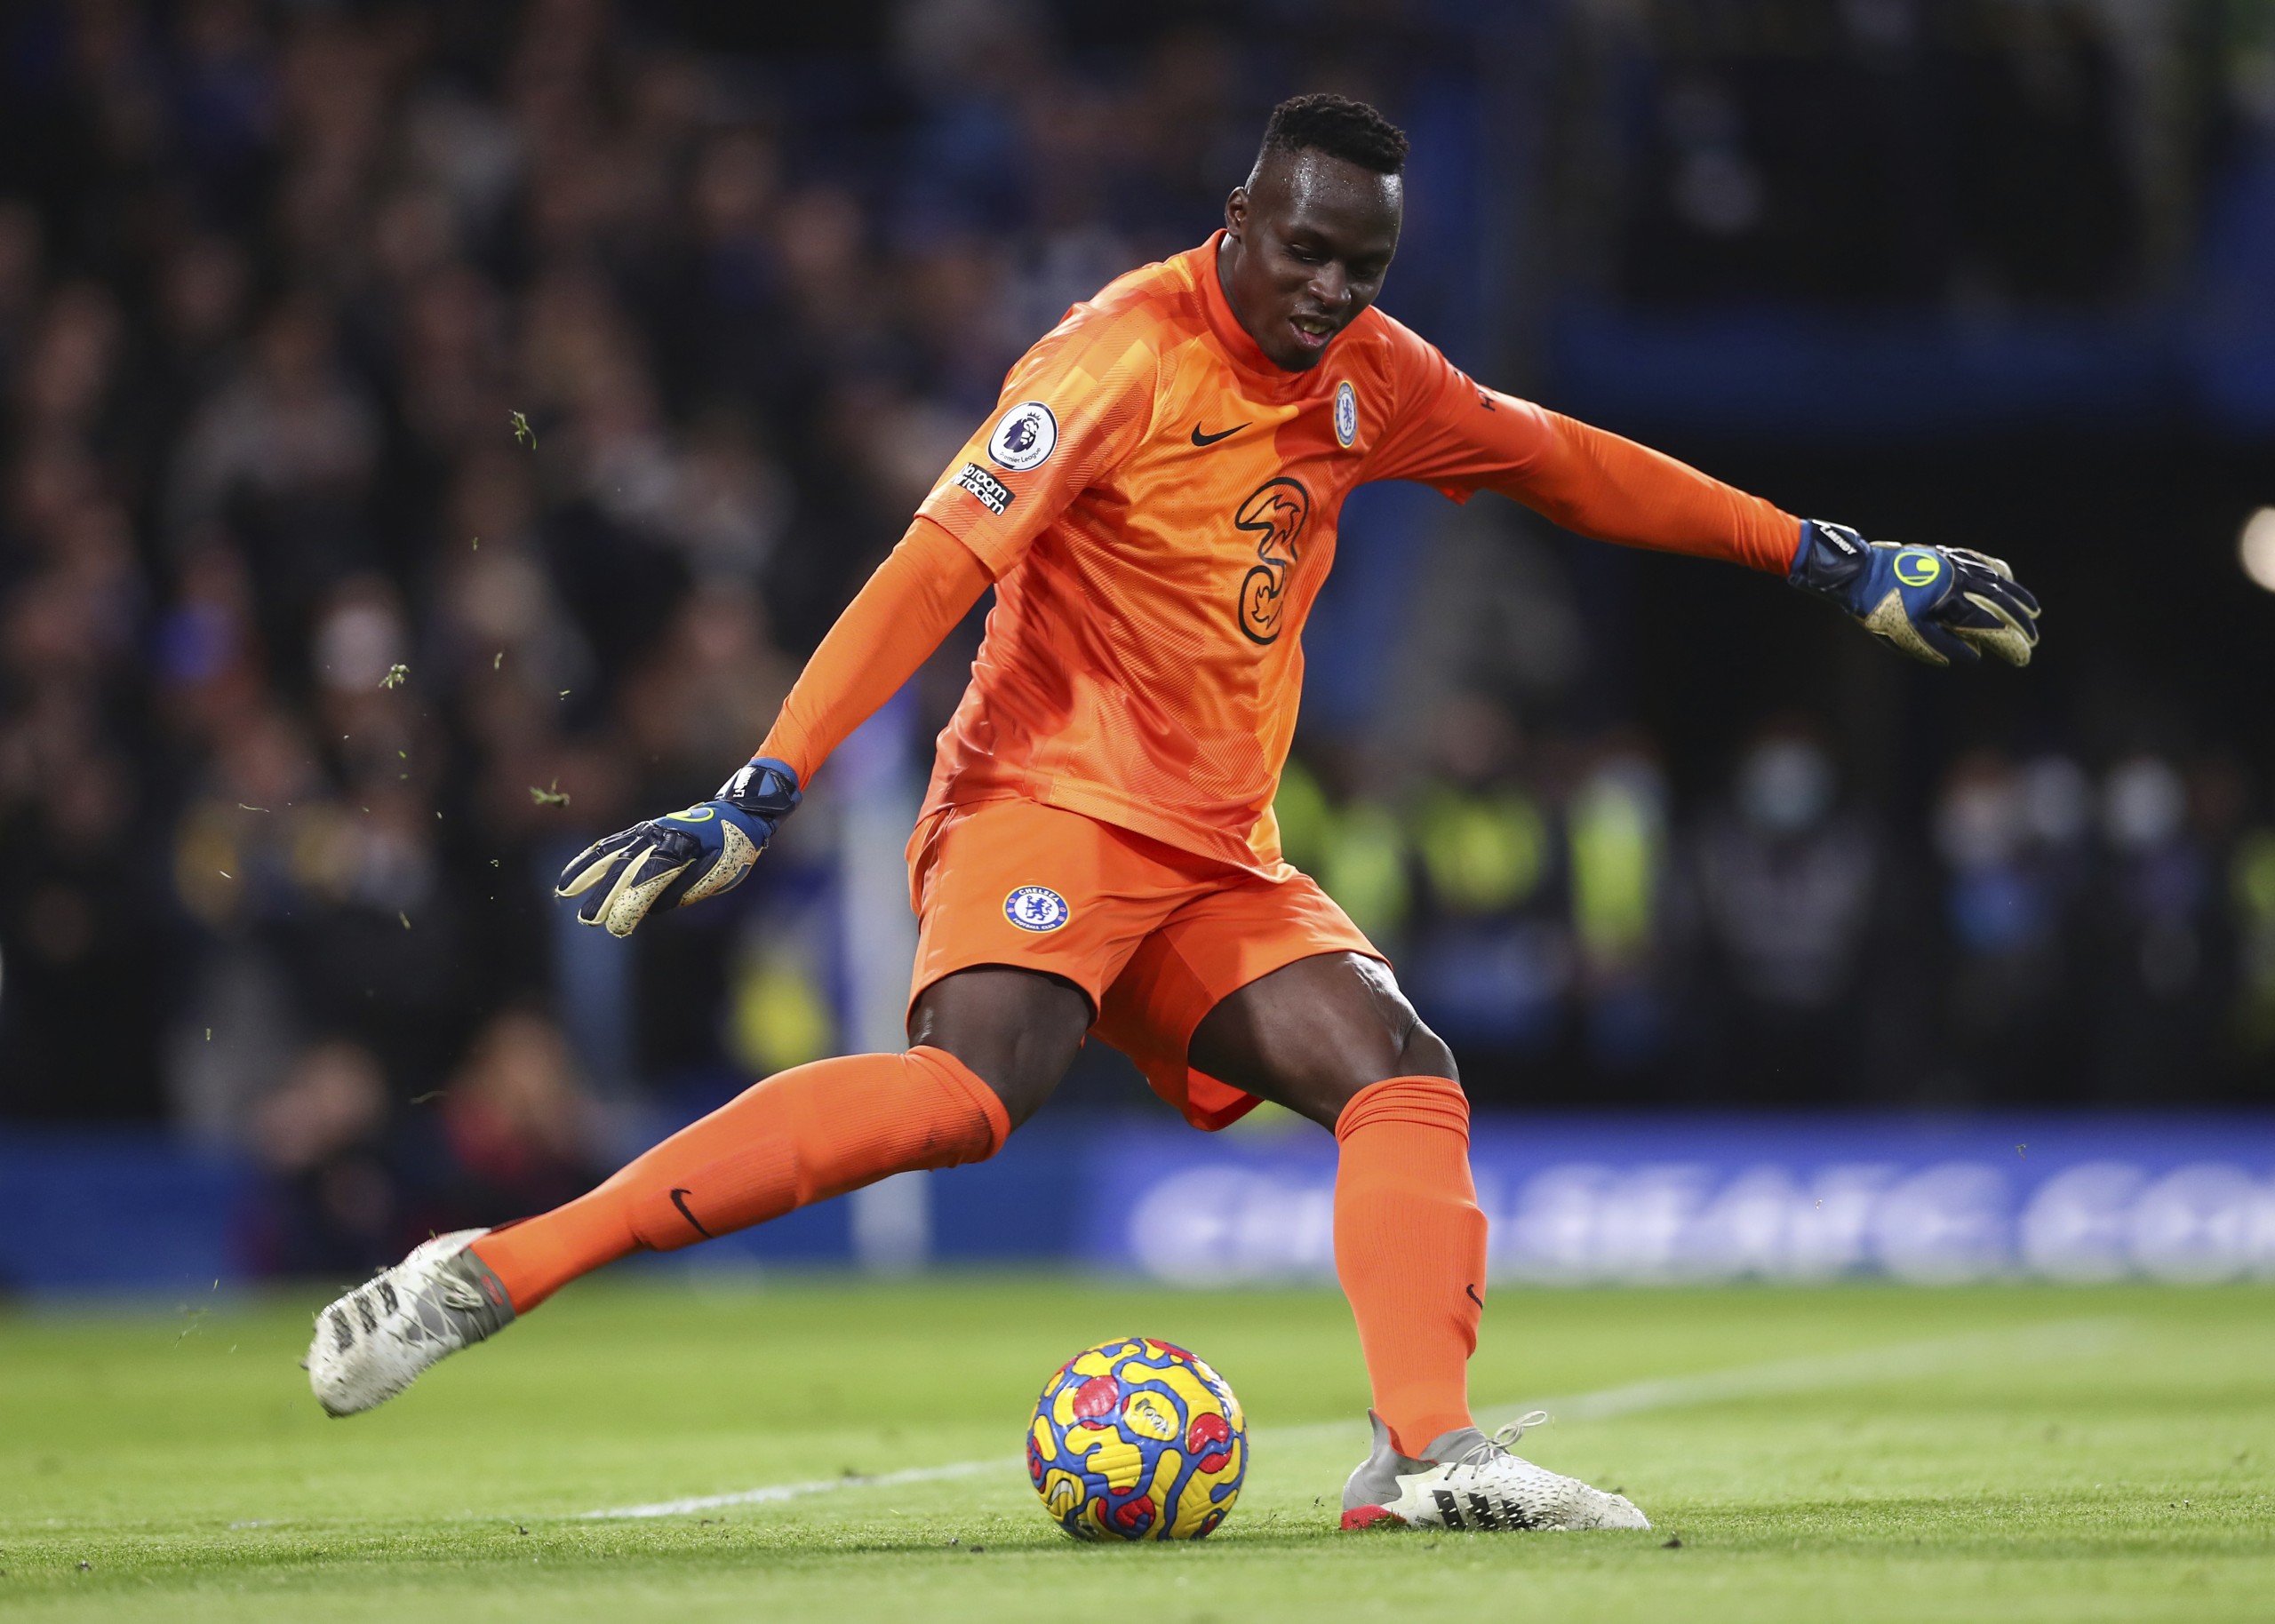 December 29, 2021, London, United Kingdom: London, England, 29th December 2021. Edouard Mendy of Chelsea kicks the ball during the Premier League match at Stamford Bridge, London. Picture credit should read: Jacques Feeney / Sportimage(Credit Image: © Jacques Feeney/CSM via ZUMA Wire) (Cal Sport Media via AP Images)